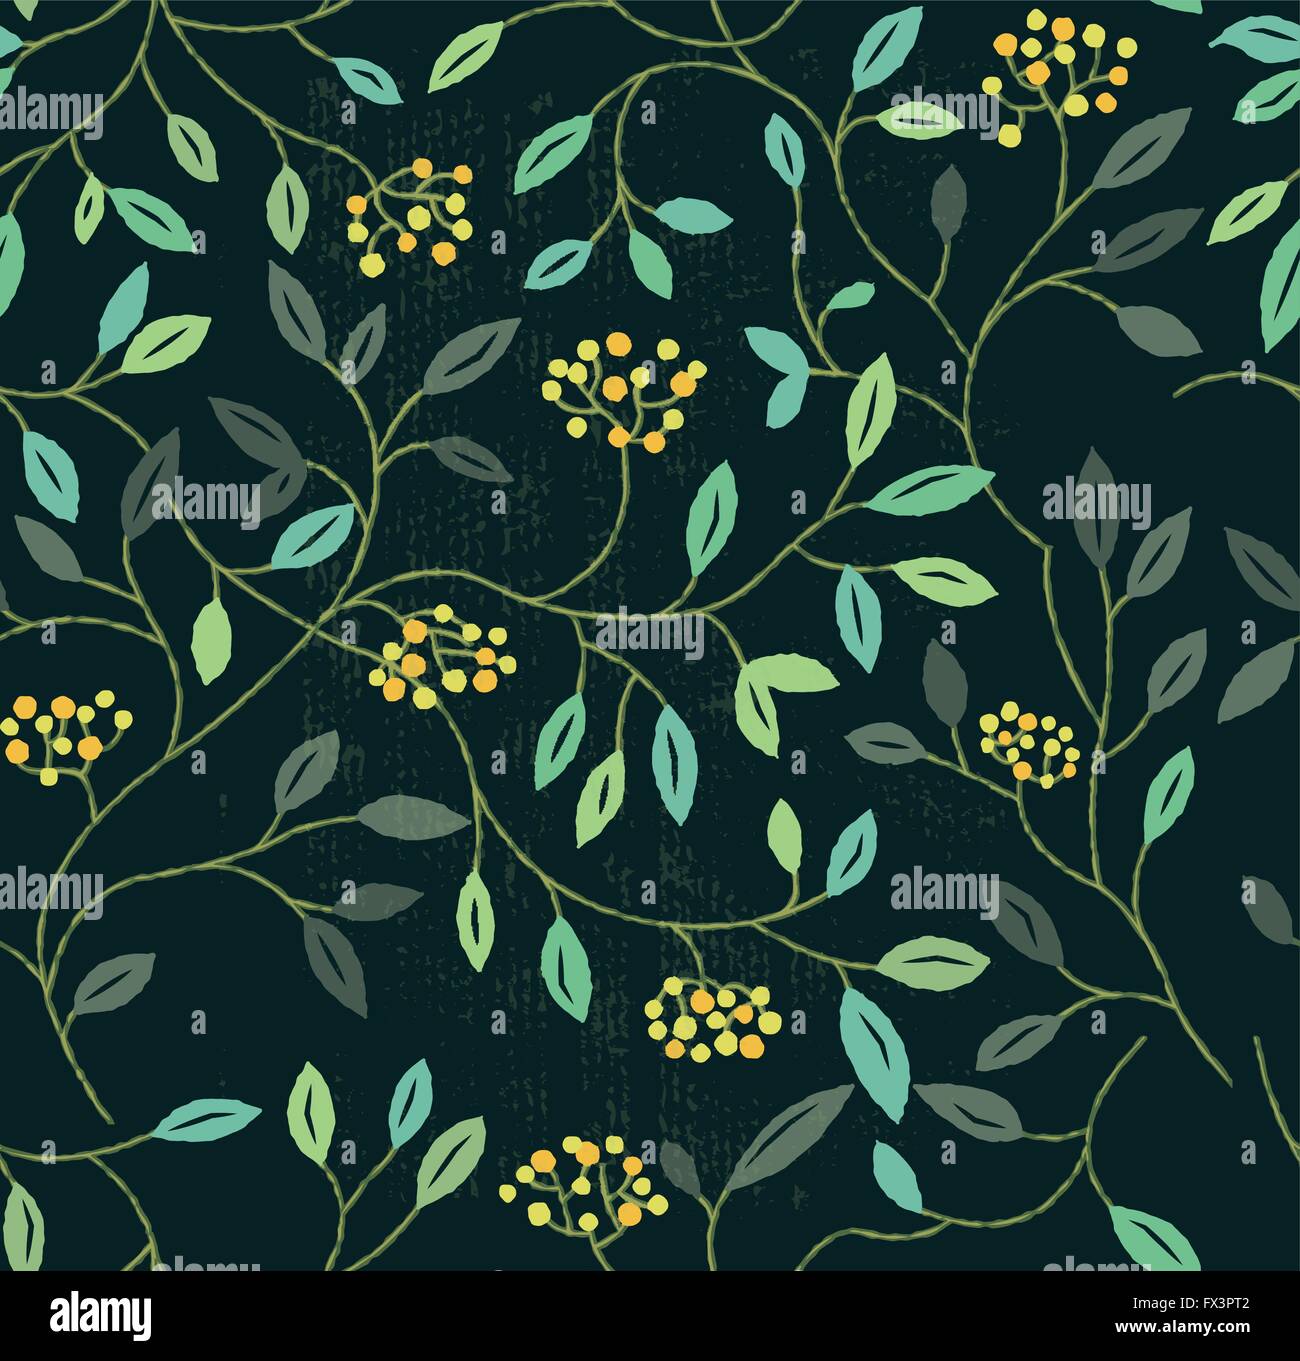 Floral Summer Seamless Pattern. Repeating floral elements background. Vector illustration Stock Vector